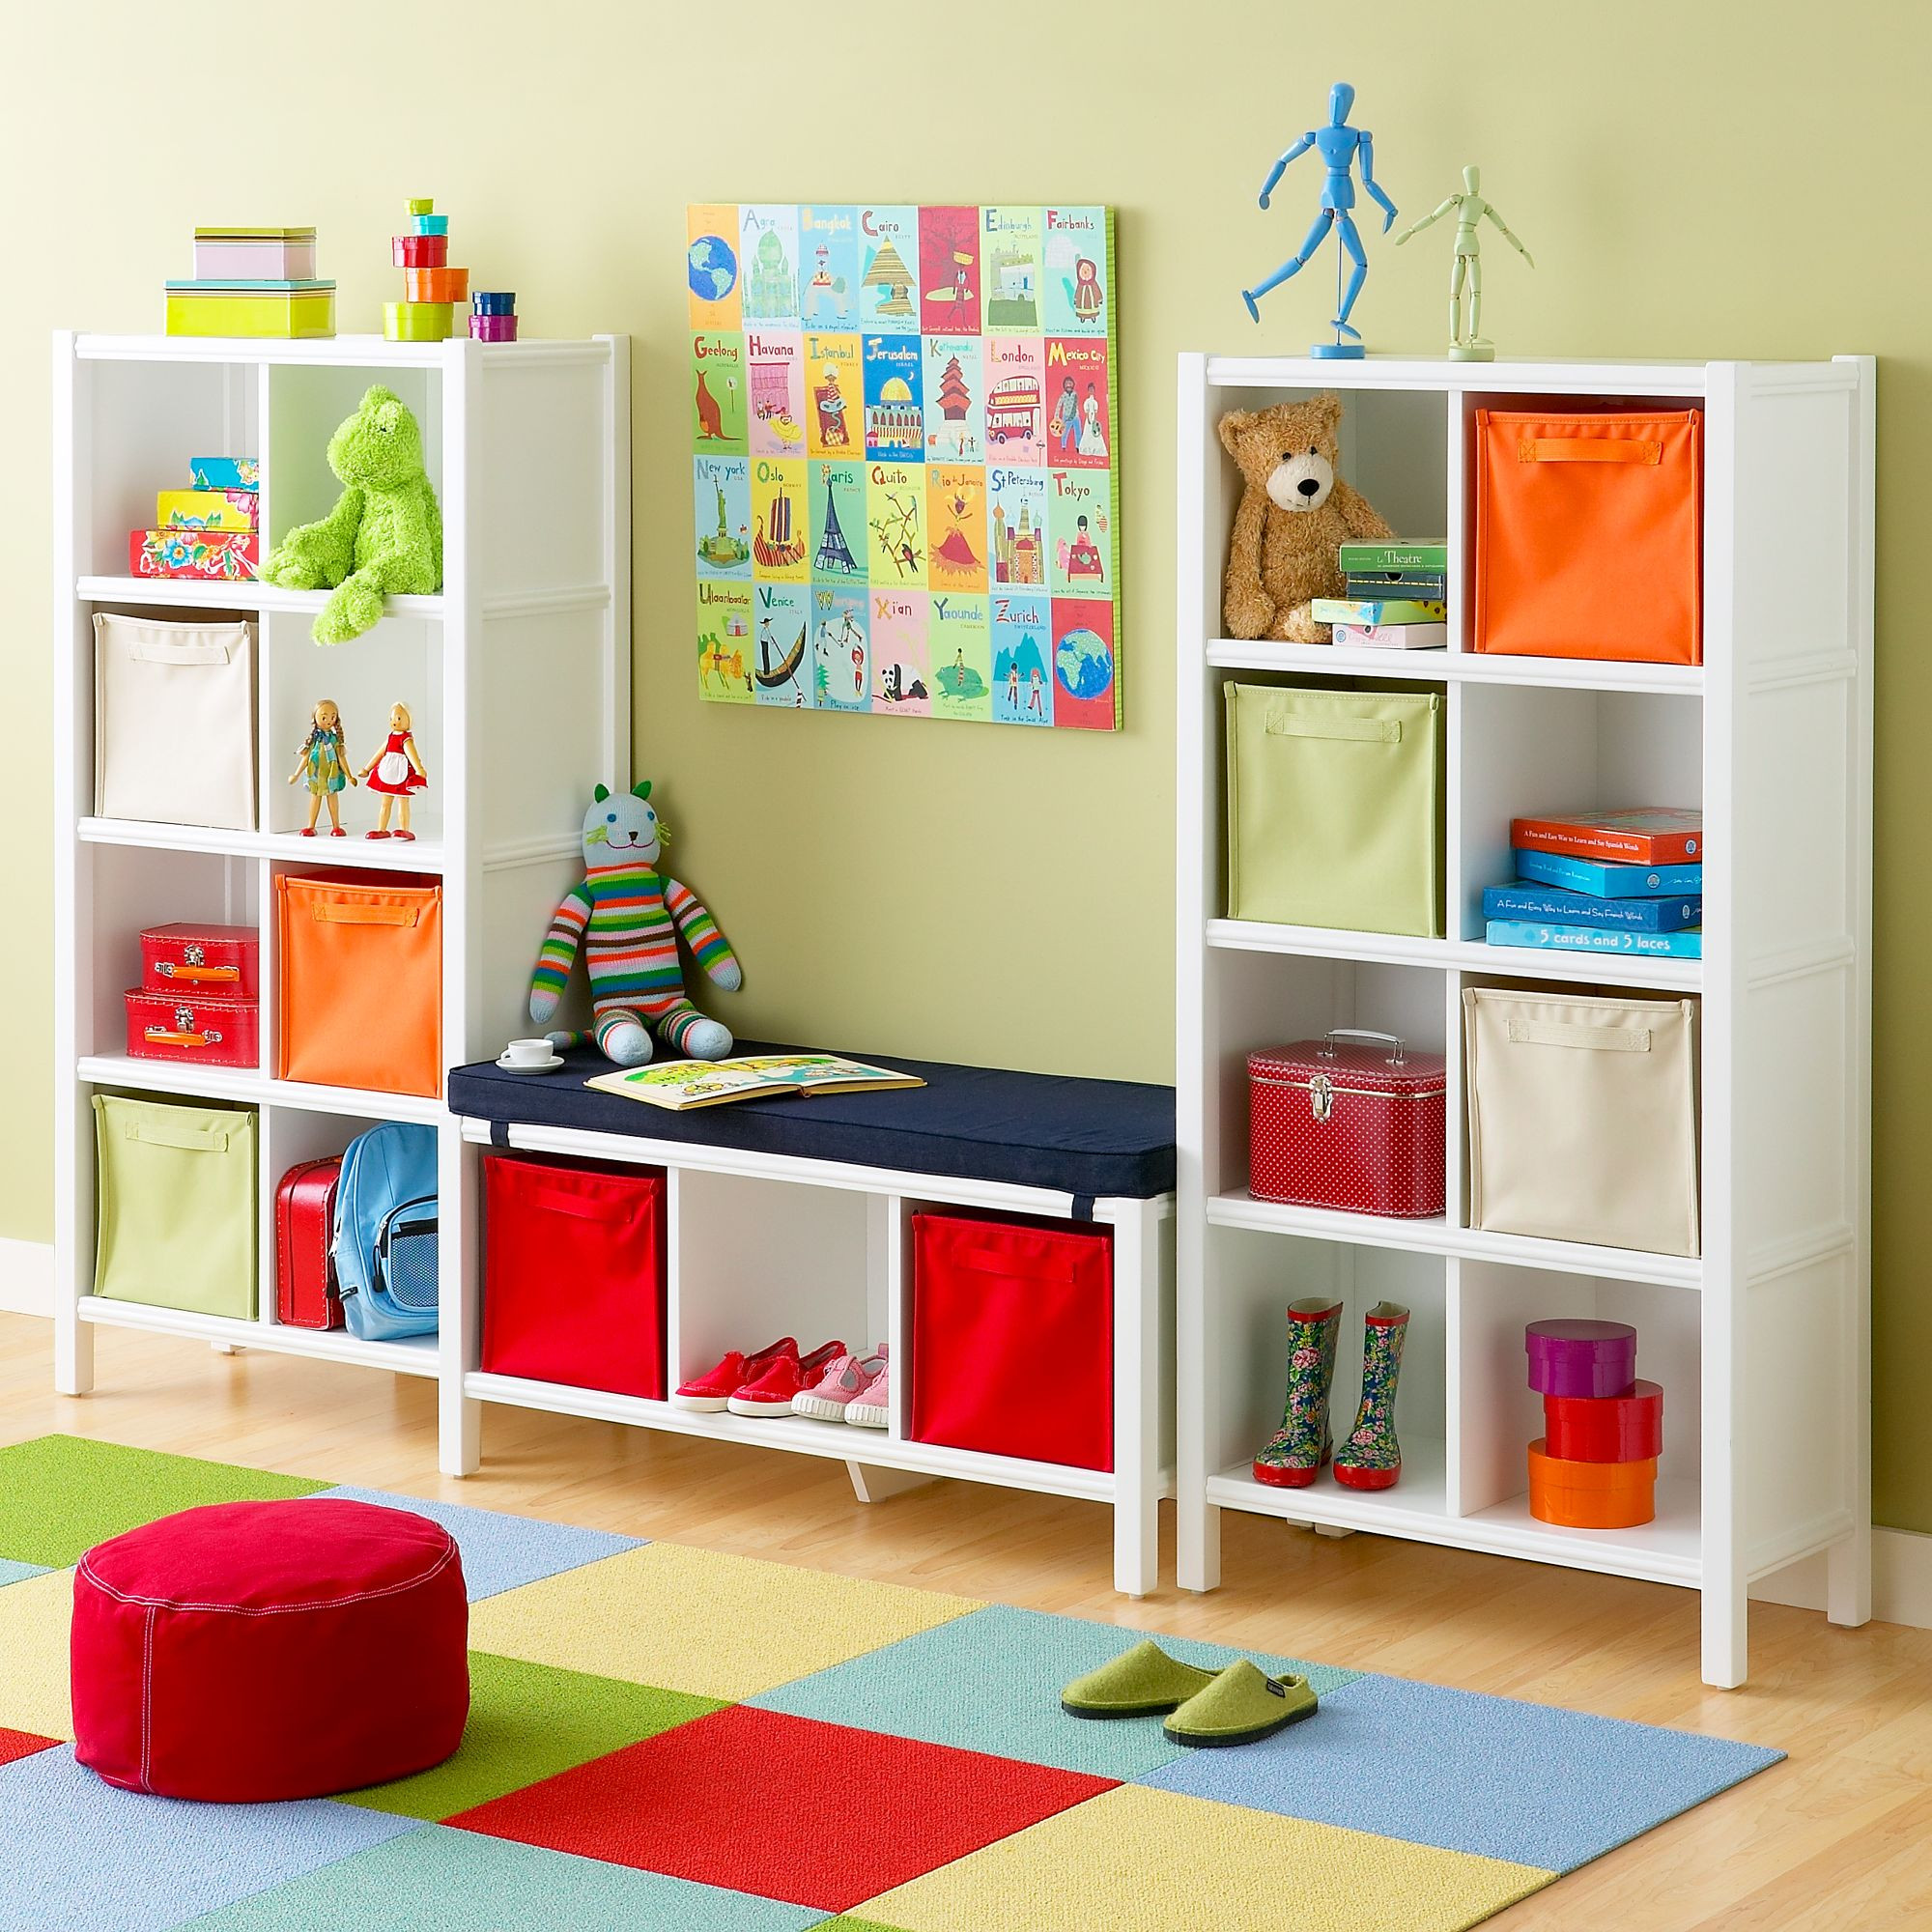 Childrens Bedroom Storage Ideas
 25 Exceptional Toddler Boy Room Ideas SloDive